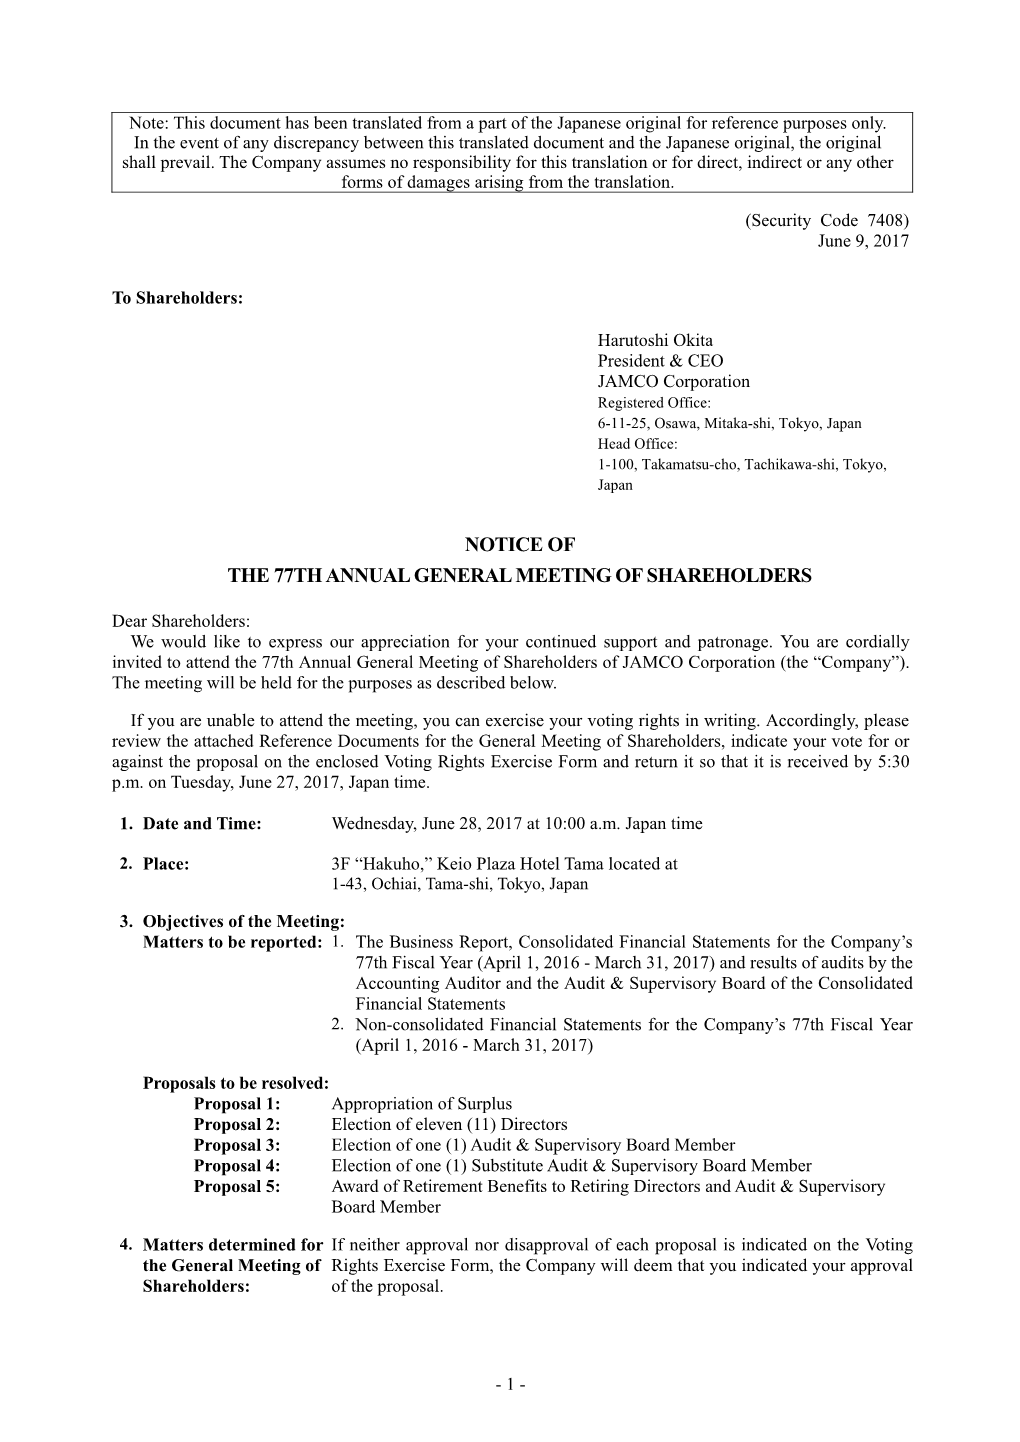 Notice of the 77Th Annual General Meeting of Shareholders